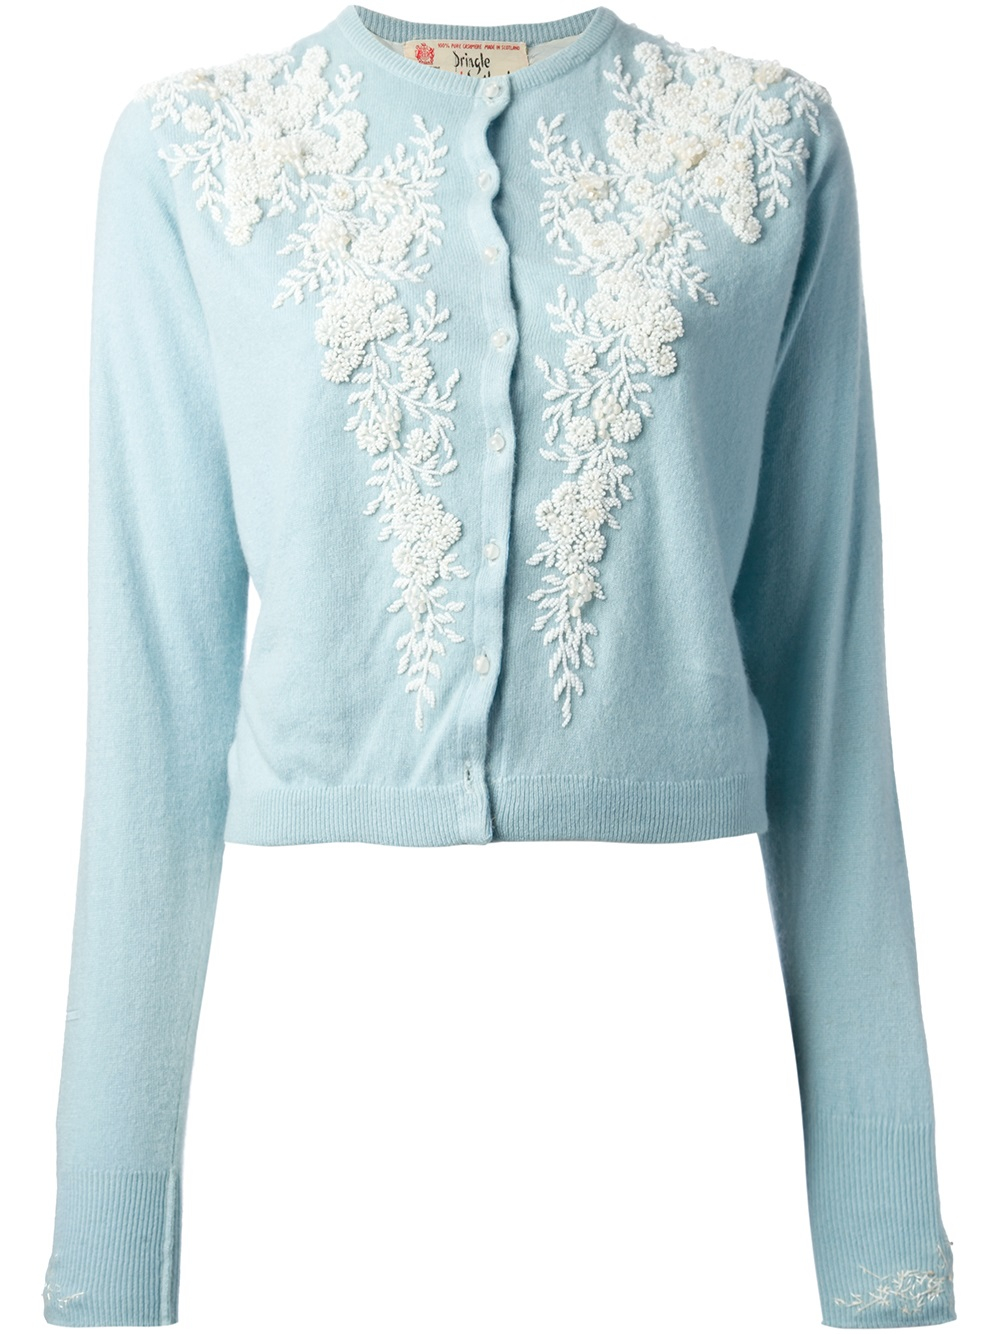 Pringle of Scotland Floral Embroidered Cardigan in Blue | Lyst